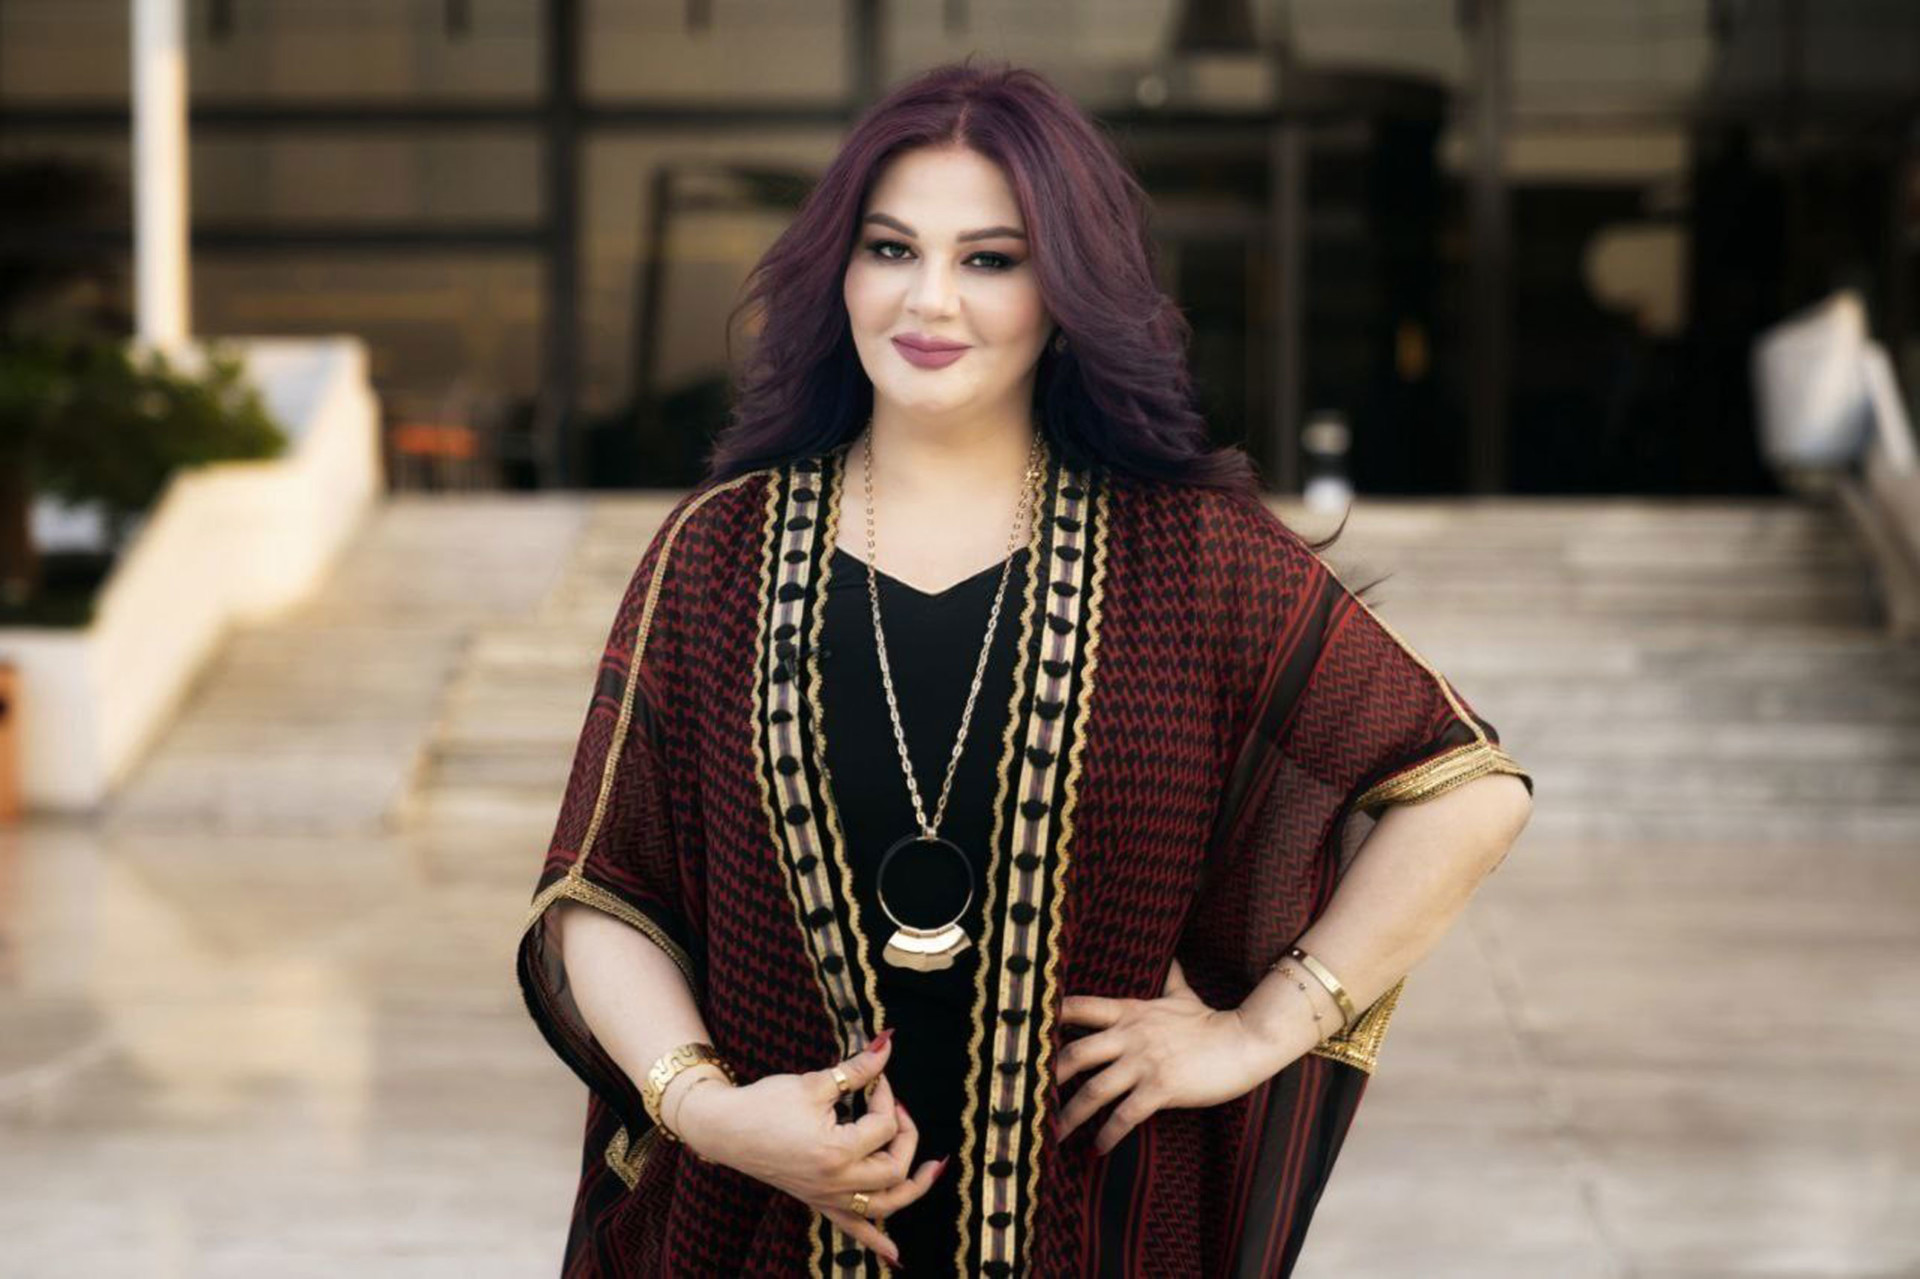 An Iraqi Actress to Sue The Economist Over ‘Fat’ Photo